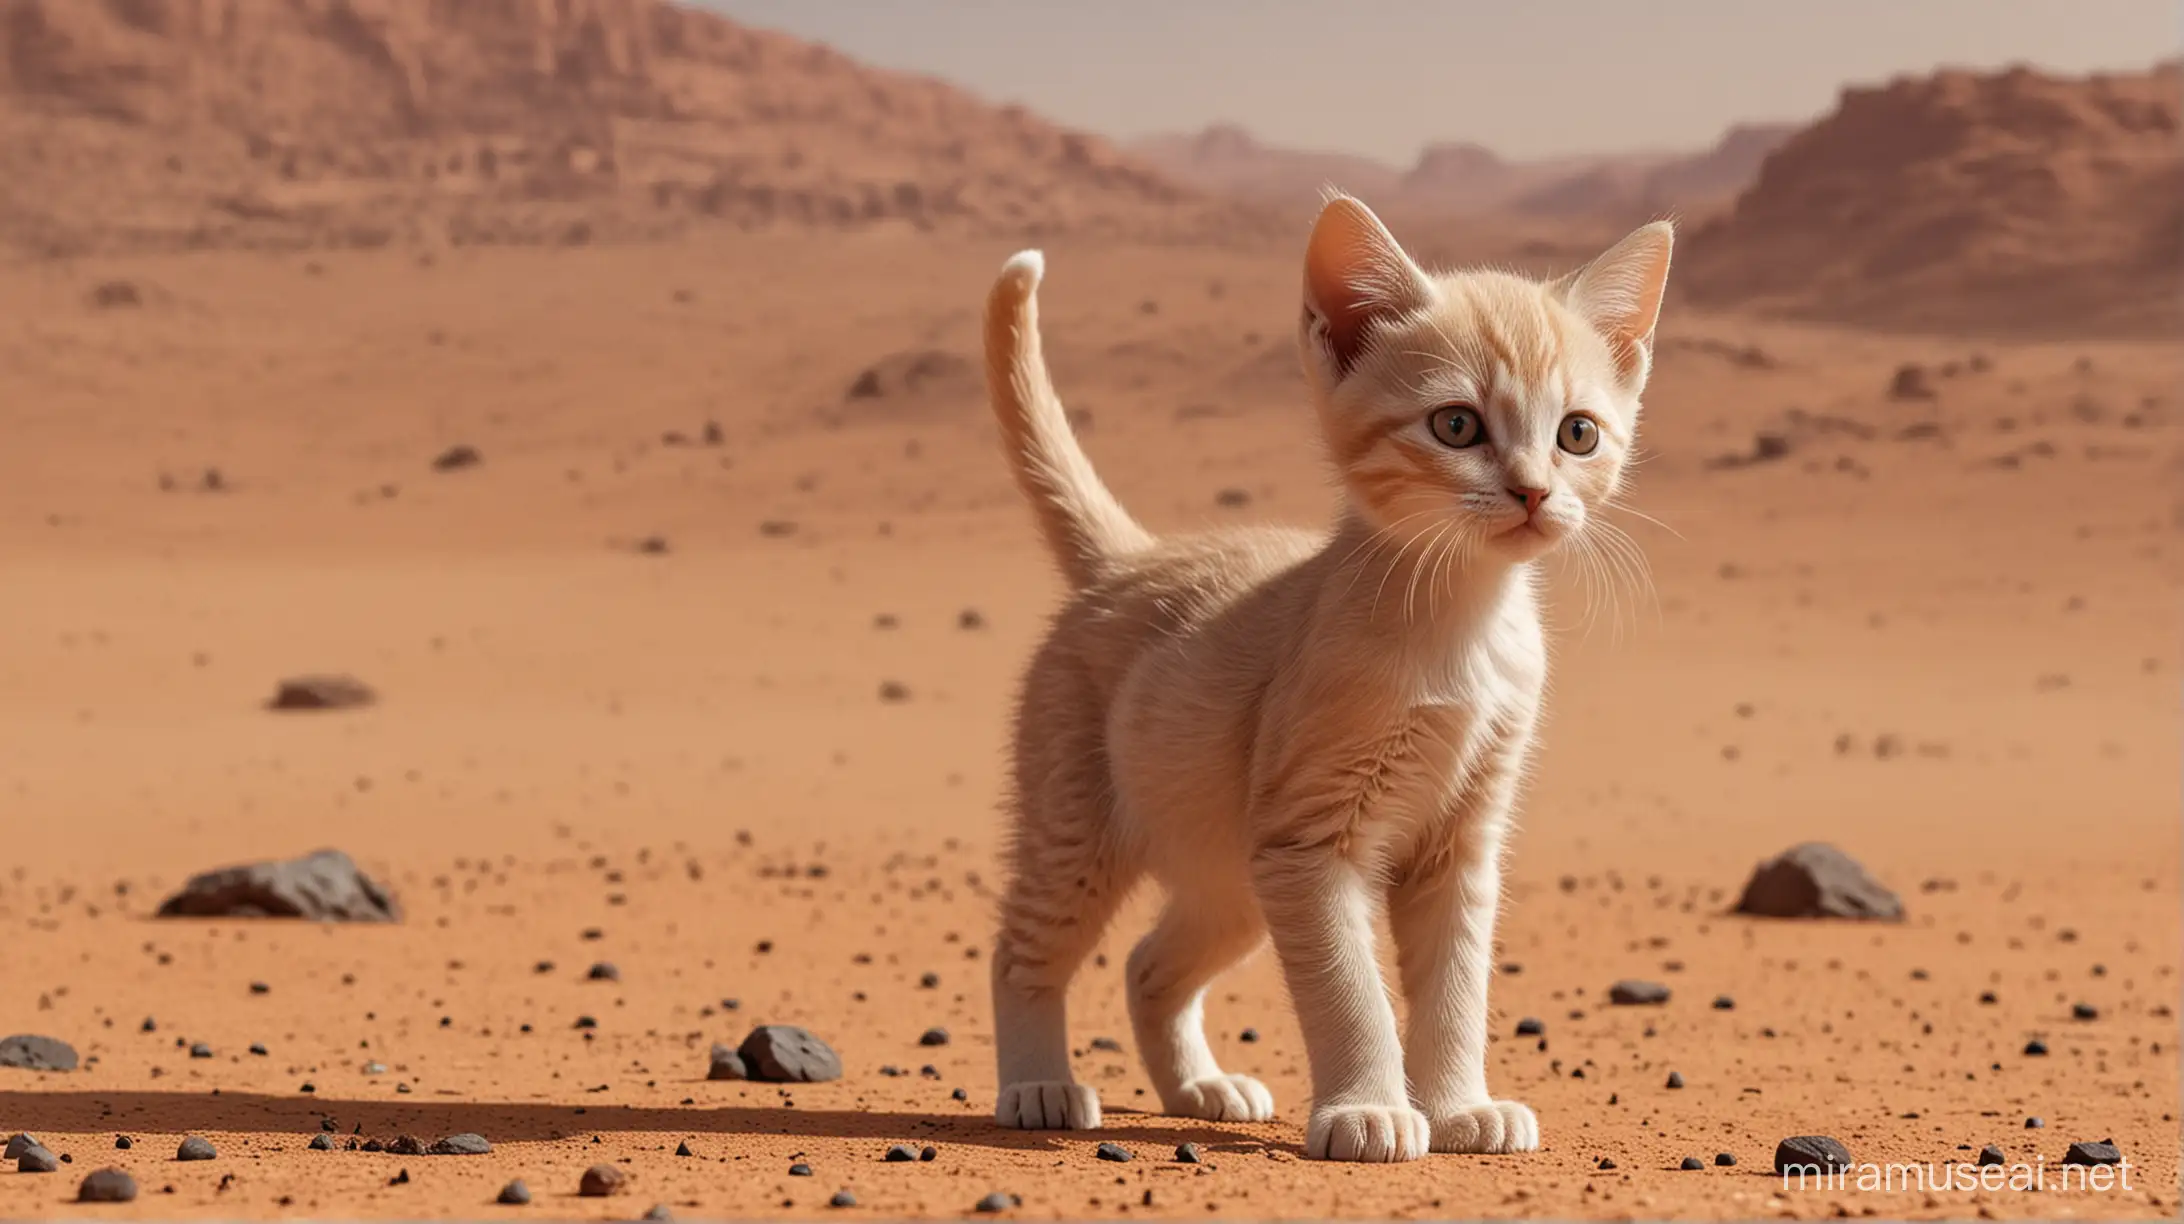 micro human/kitten hybrid stand upright like a human with human features living on mars